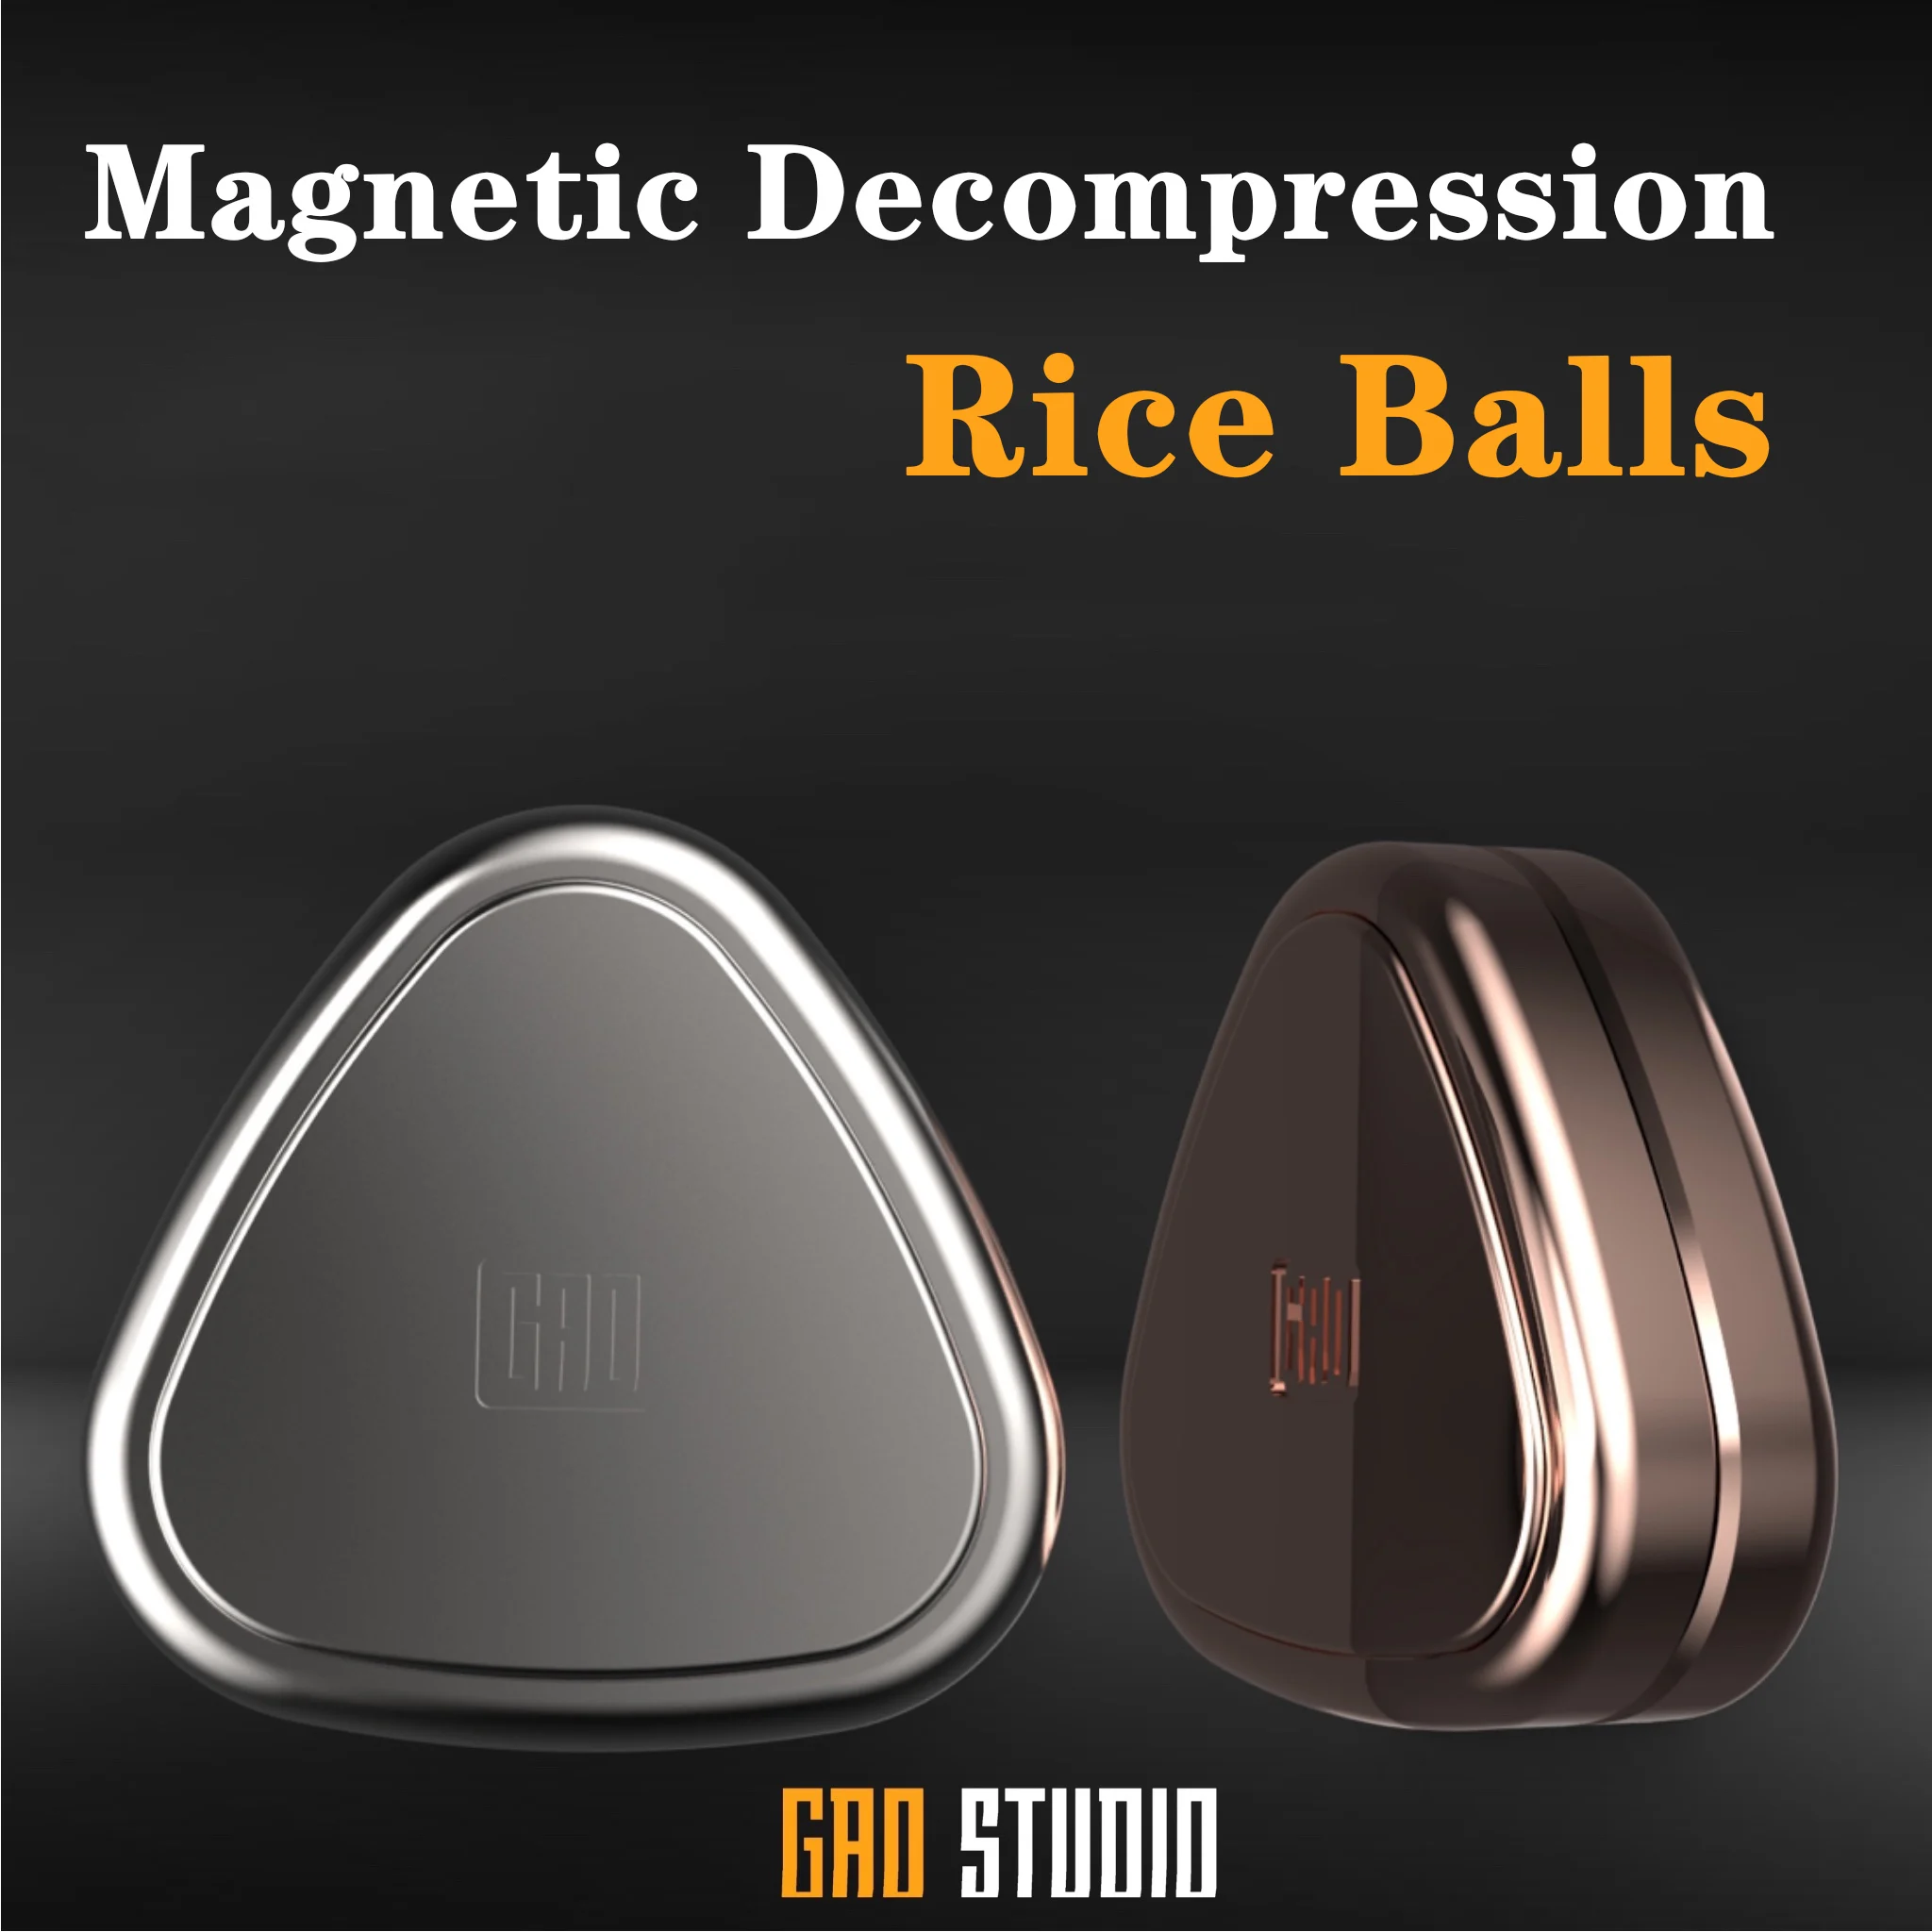 Enlarge STOCK GAO STUDIO Magnetic Rice Ball Maga Multi-functional Decompression Push Brand Edc Stainless Steel Leisure Trend Office Toys